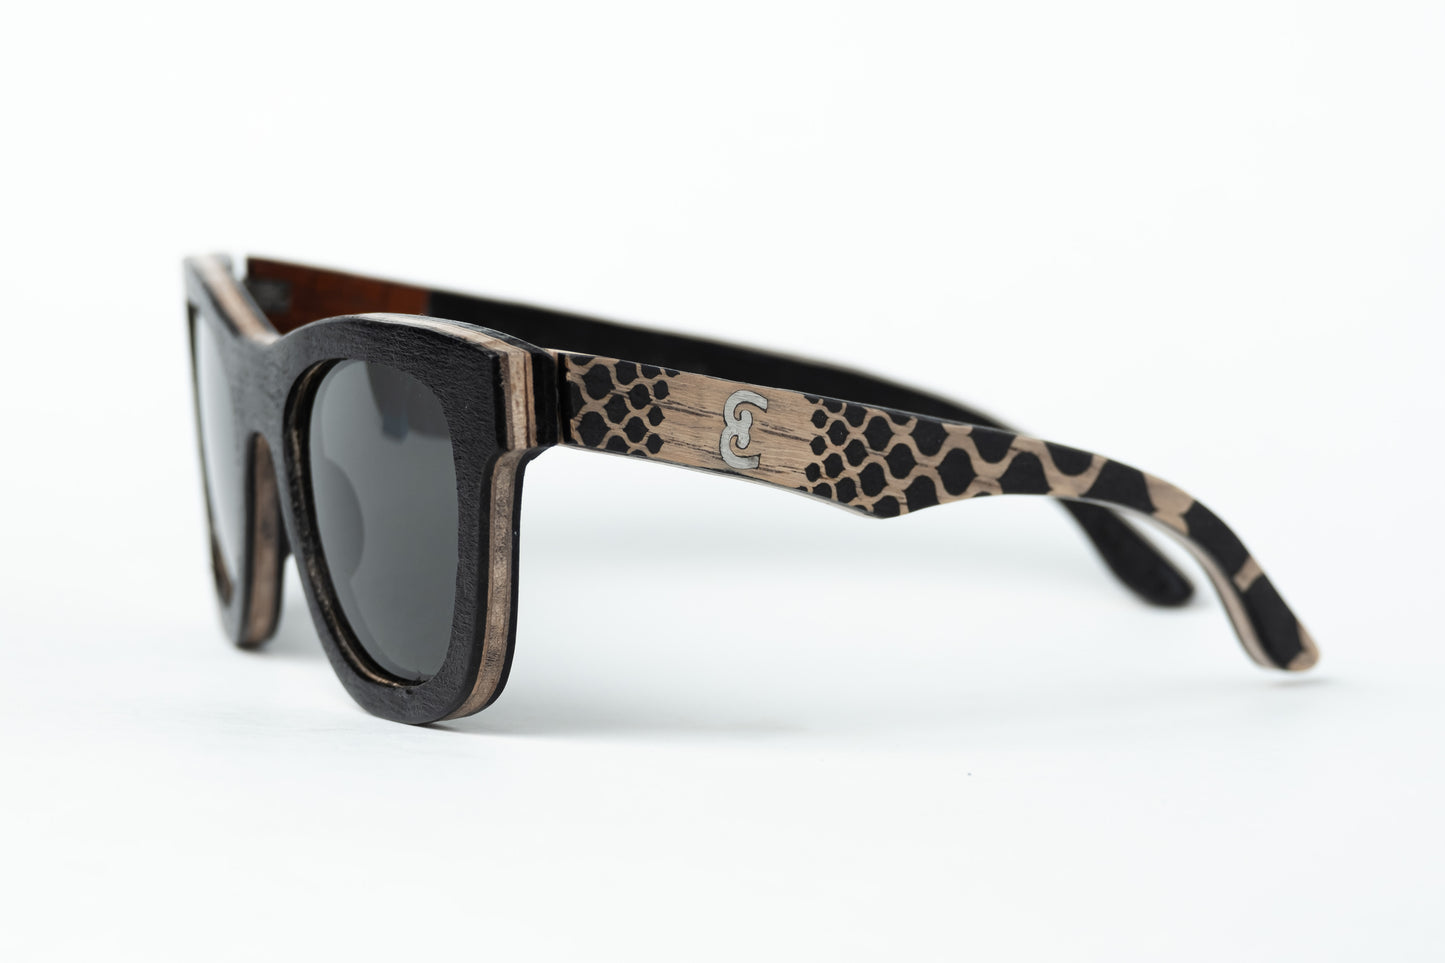 5 layer wood frame sunglasses with oak and pewter logo